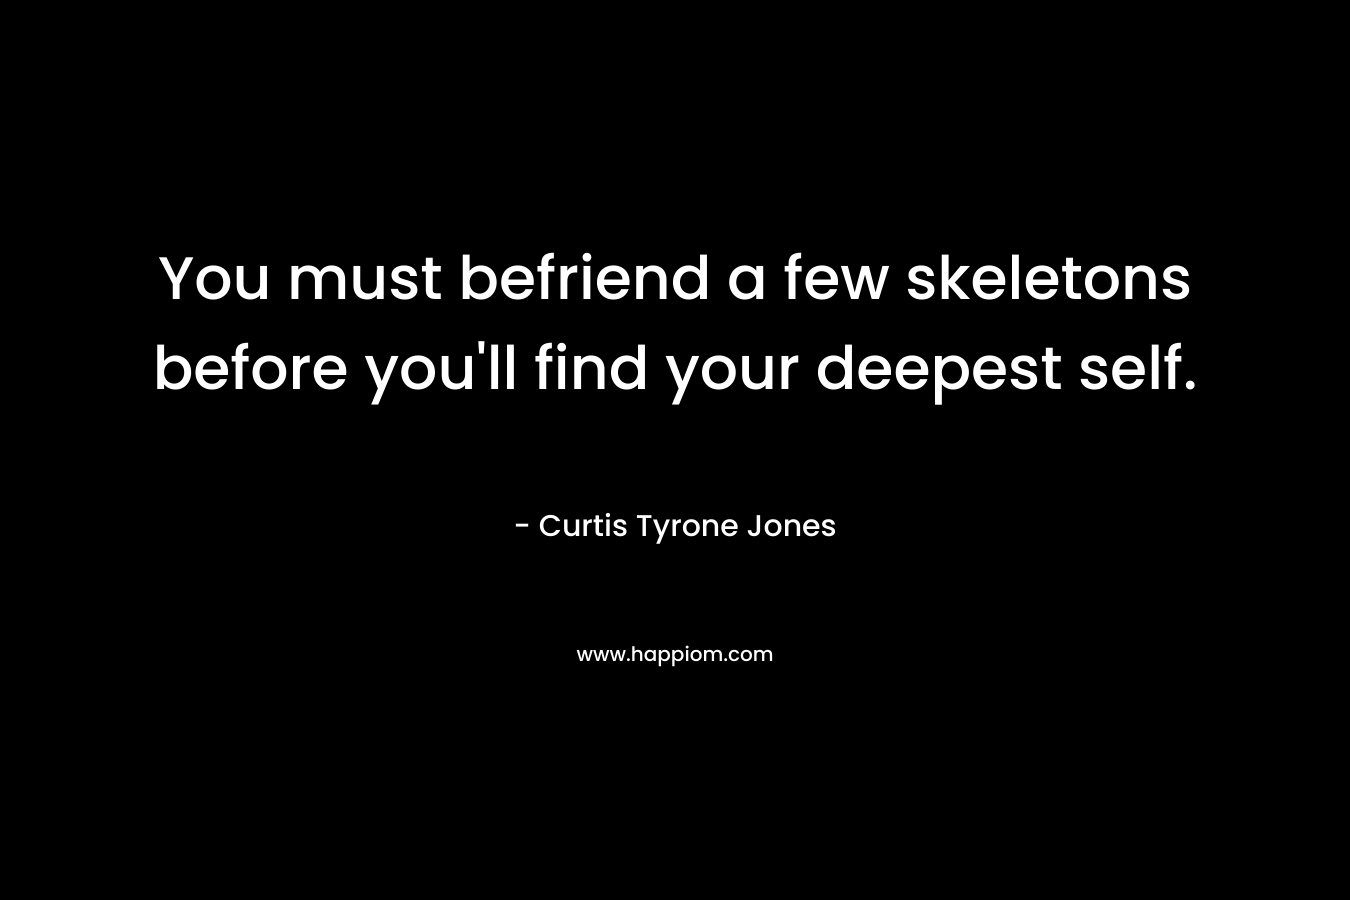 You must befriend a few skeletons before you'll find your deepest self.